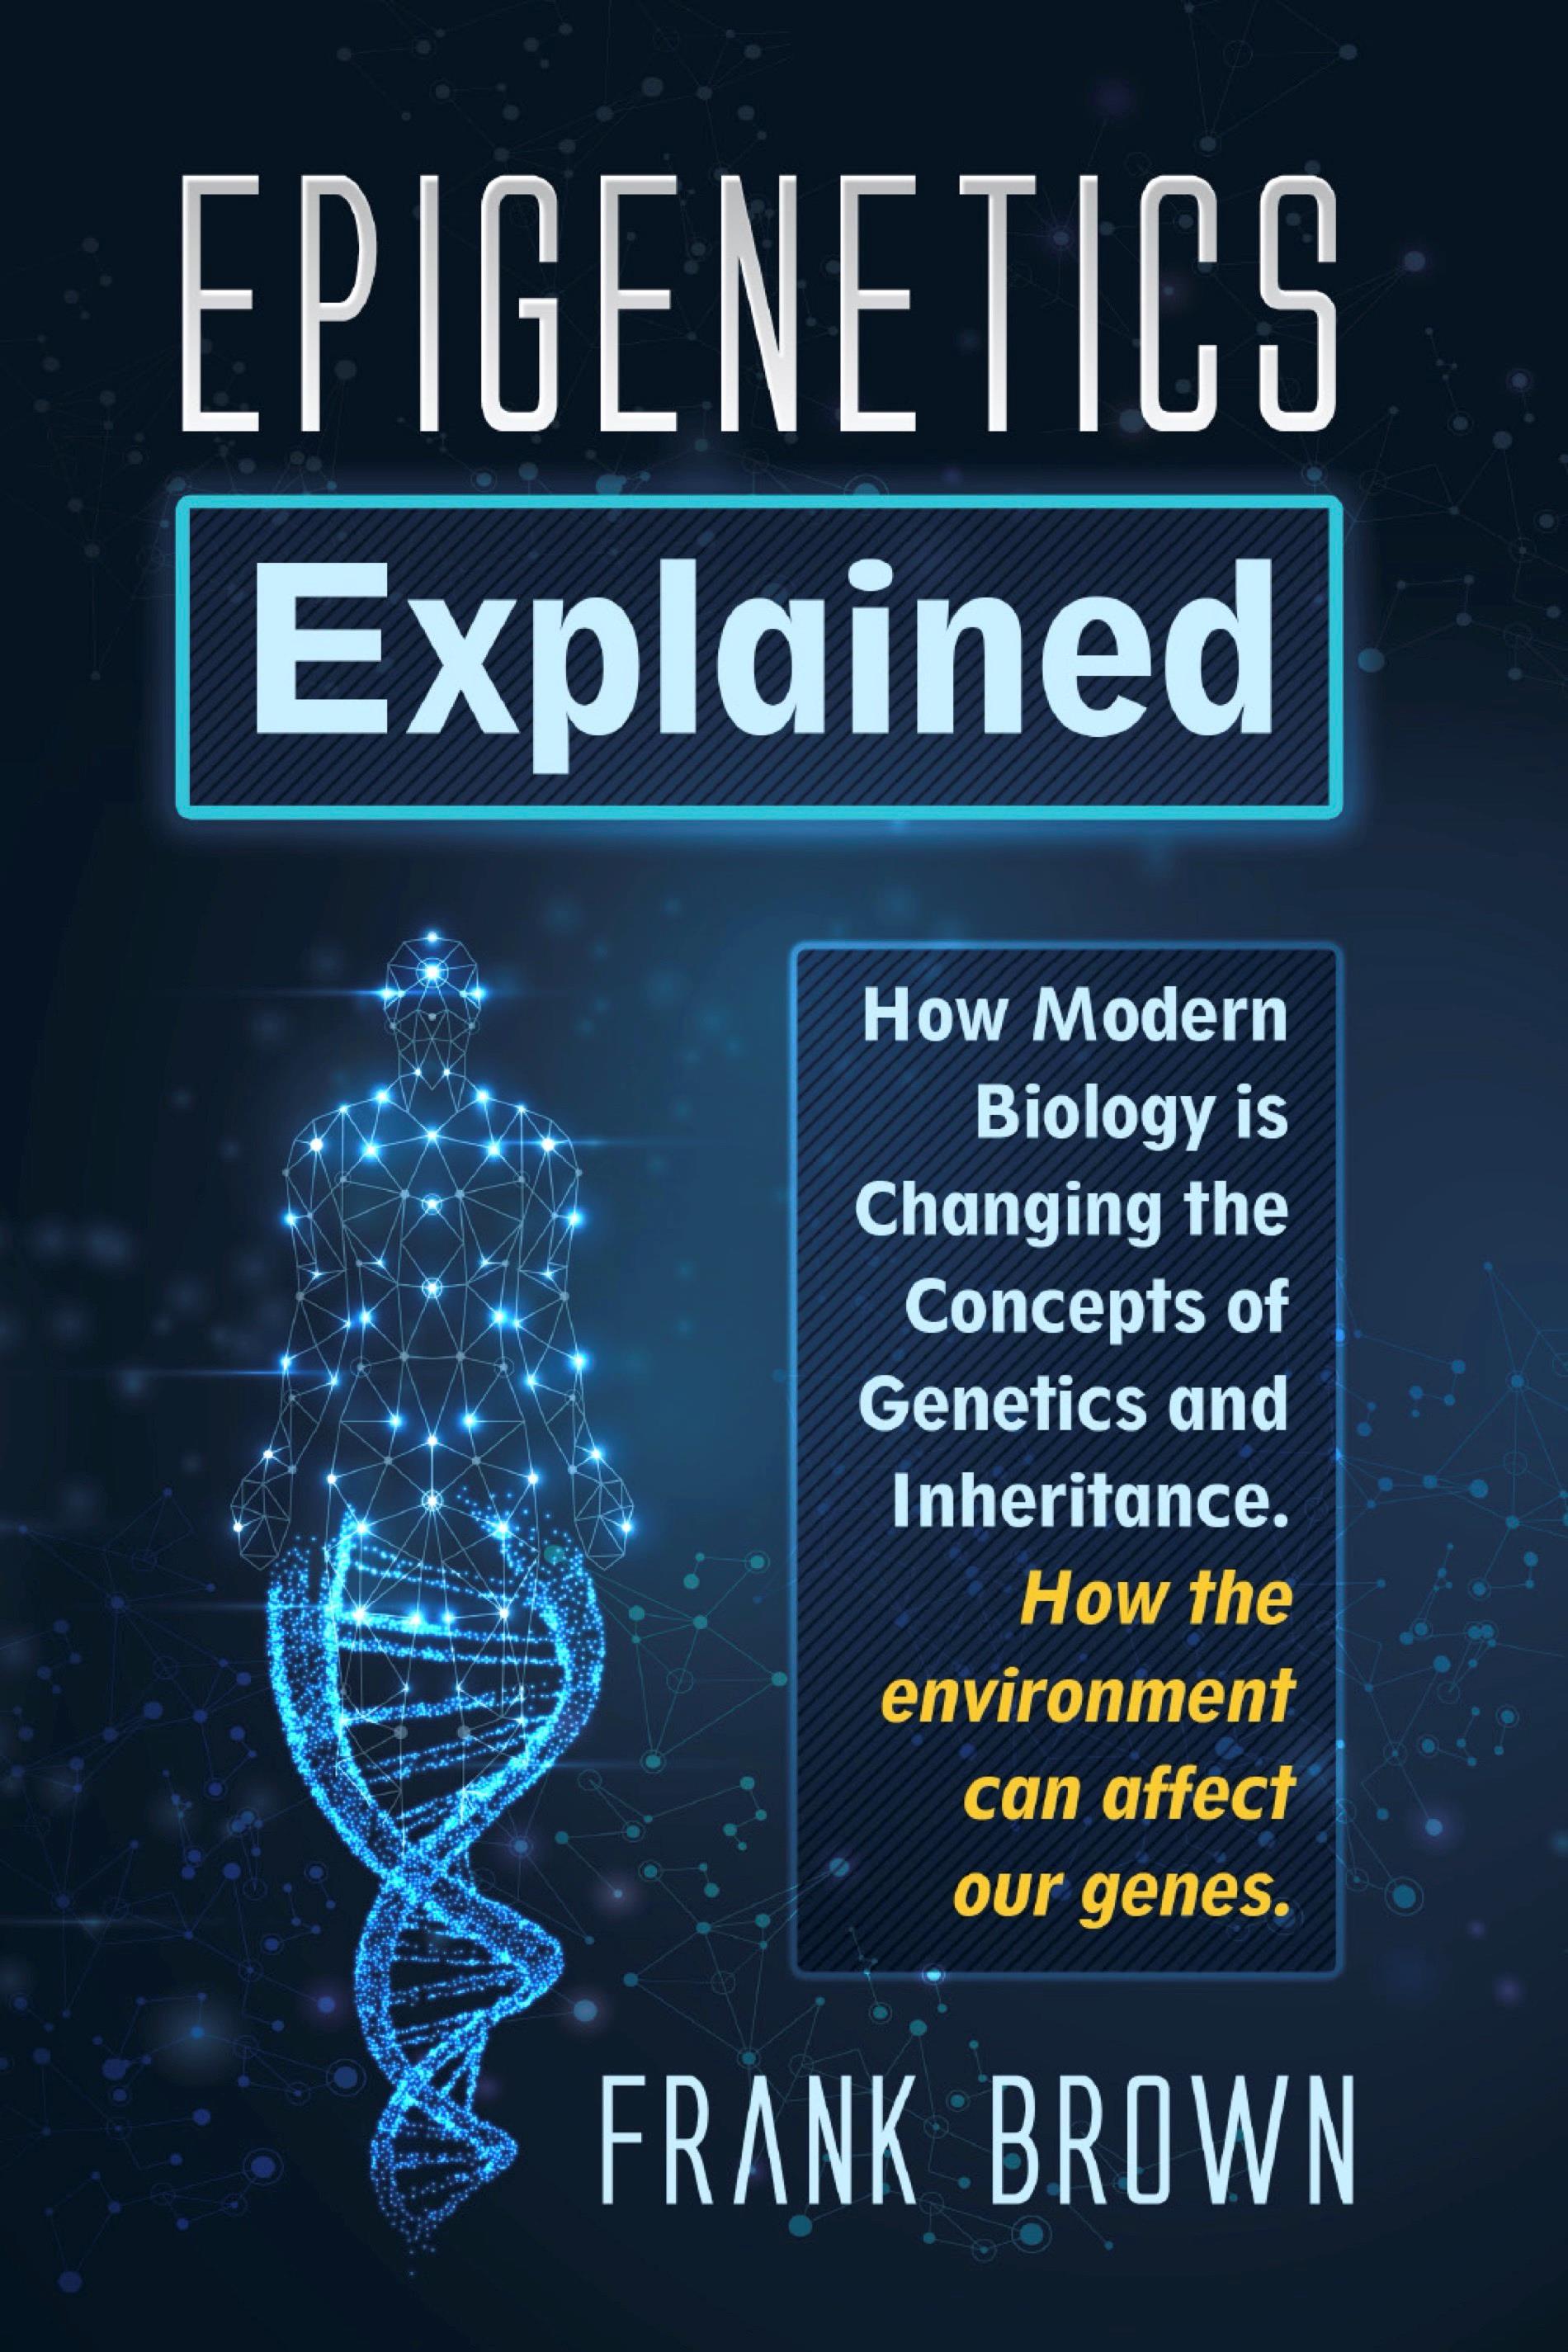 the　Modern　our　di　Brown　Genetics　of　Inheritance.　Frank　and　can　is　How　Concepts　genes.　PDF　environment　Changing　Biology　How　the　affect　Epigenetics　Explained.